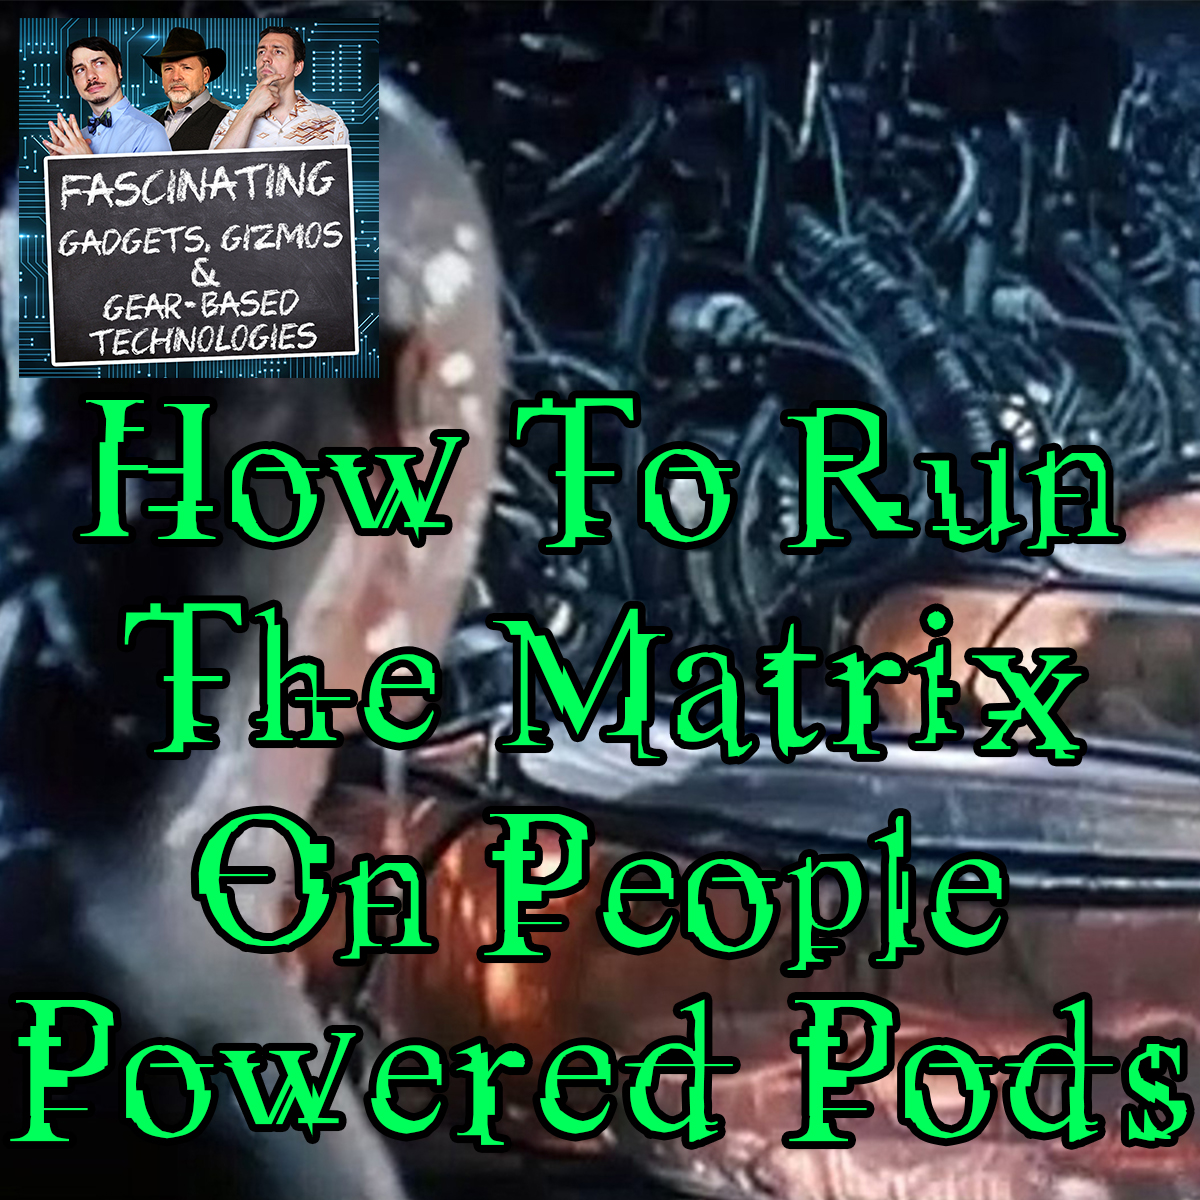 You are currently viewing Ep. 112 How To Run The Matrix on People Powered Pods